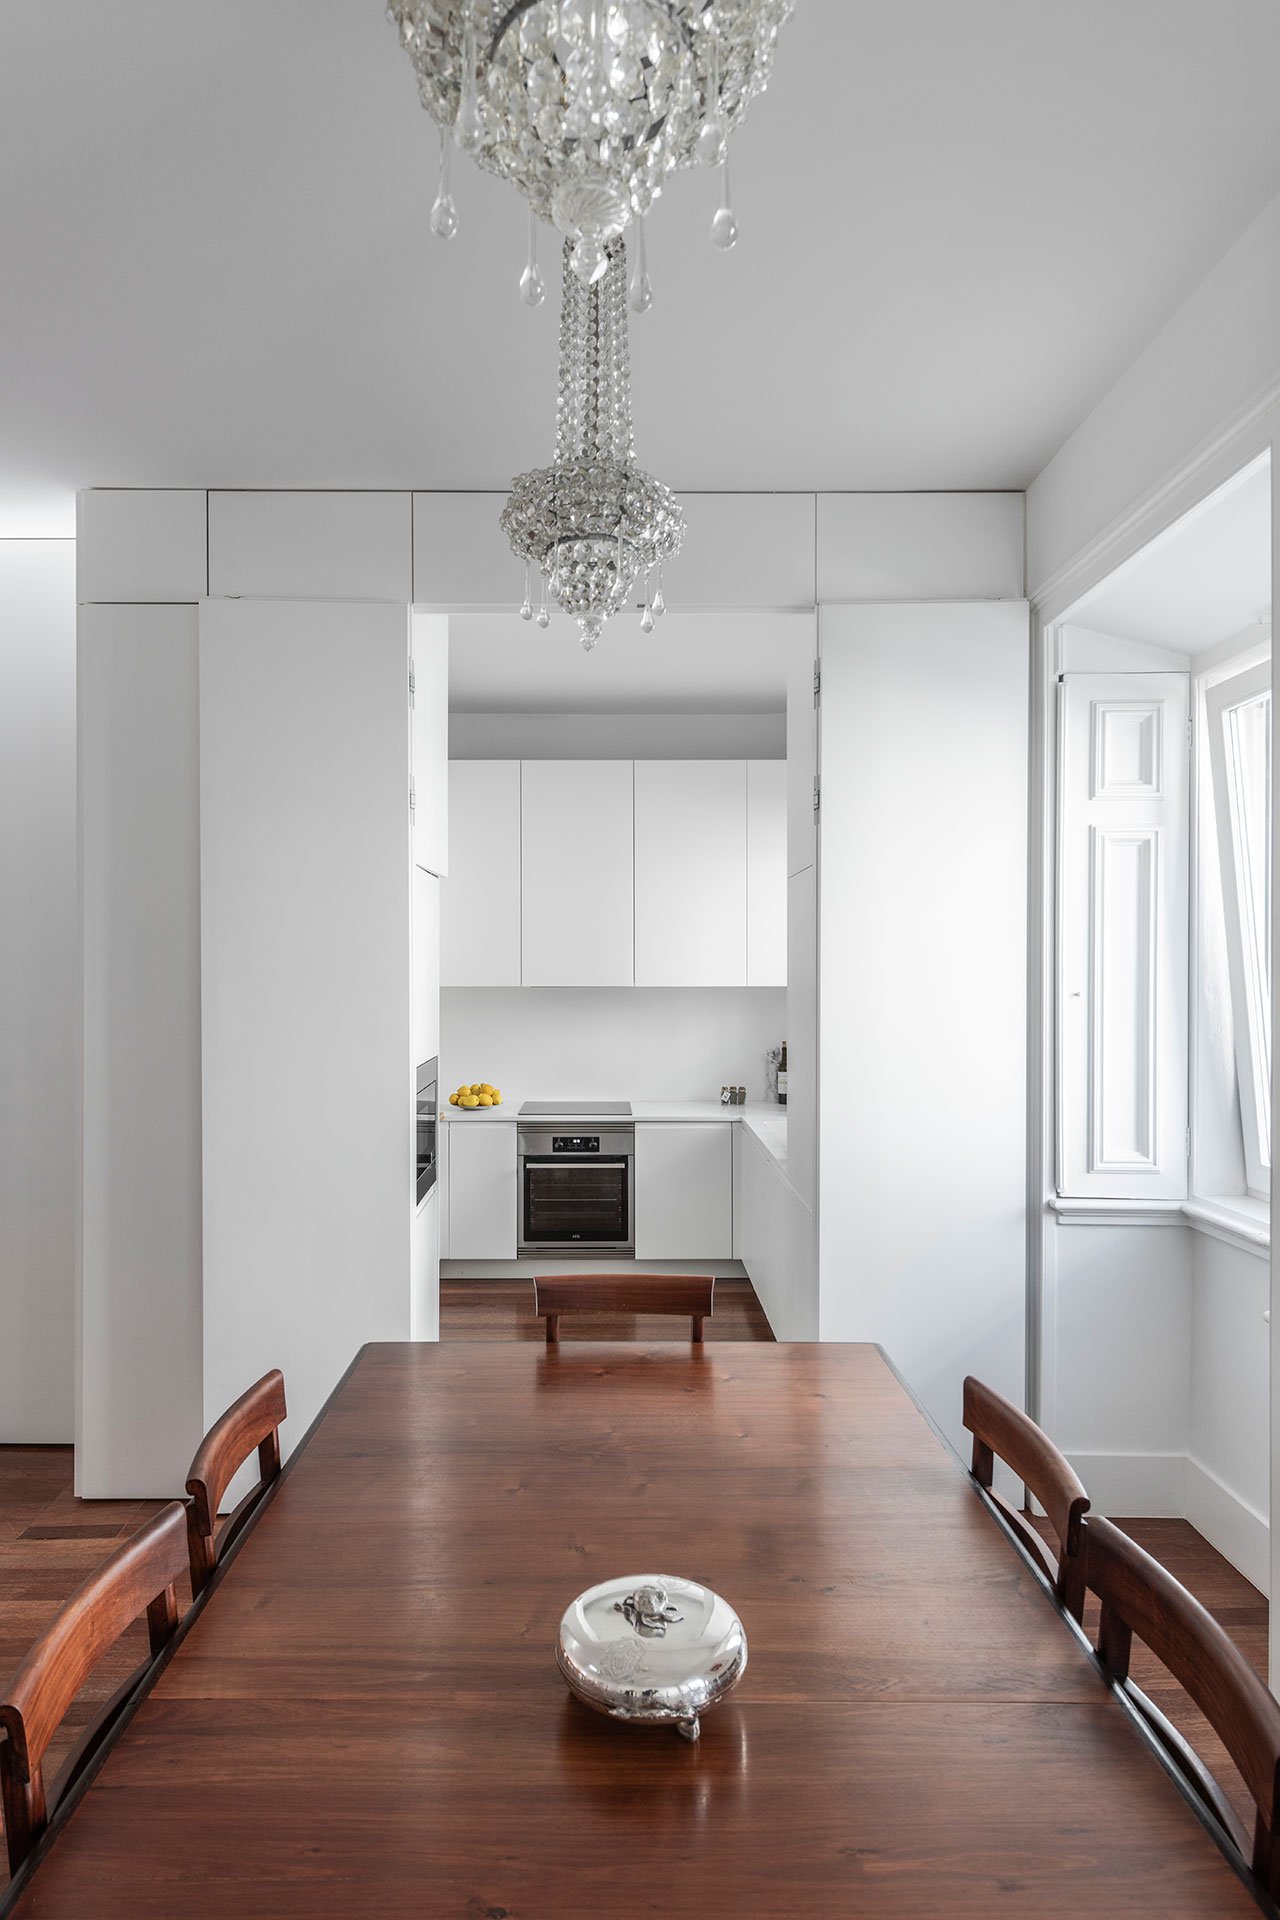 This kitchen is pure white and sleek, it's small yet very functional